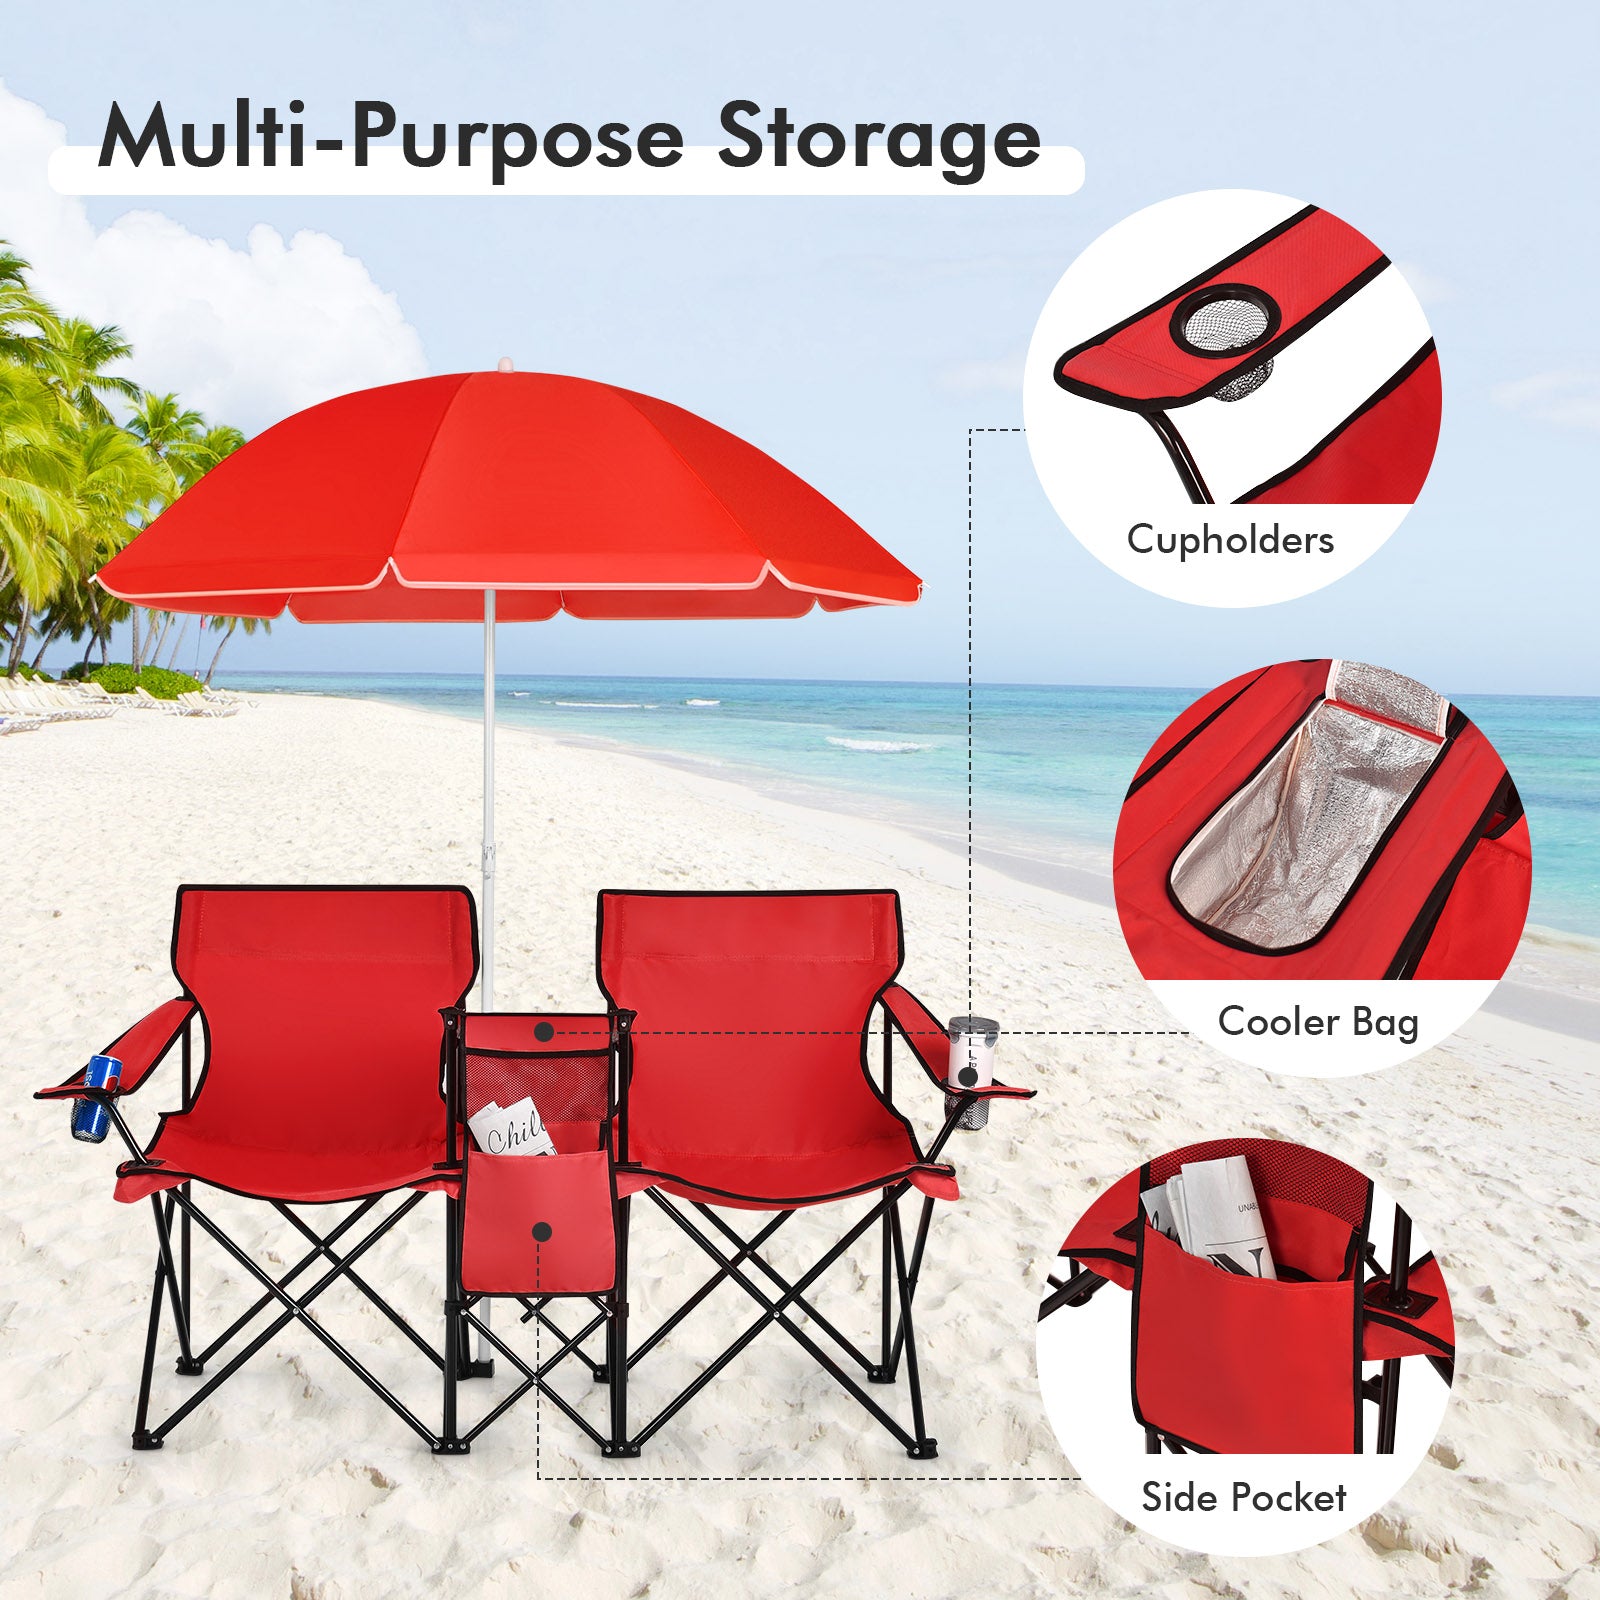 Considerate and Practical Features: These double folding camping chairs are equipped with a built-in mini table that includes a cooler bag, a side pocket, and beverage holders for added convenience. The cooler bag keeps your drinks cold and easily accessible, while the beverage holders provide a secure place to hold your beverages. The side pocket is ideal for storing magazines or other personal items.